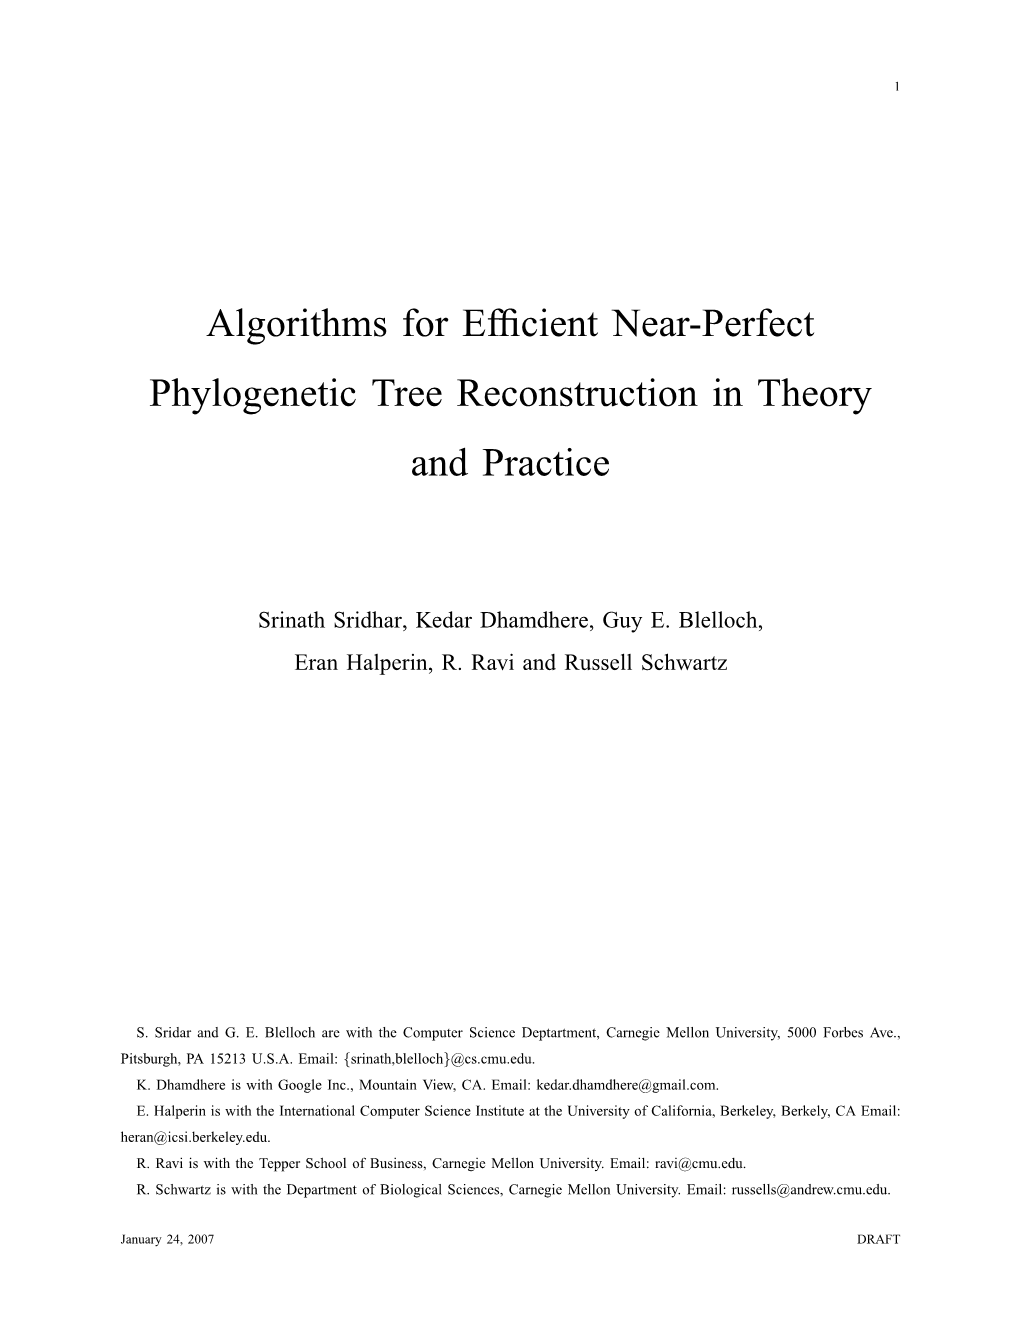 Algorithms for Efficient Near-Perfect Phylogenetic Tree Reconstruction